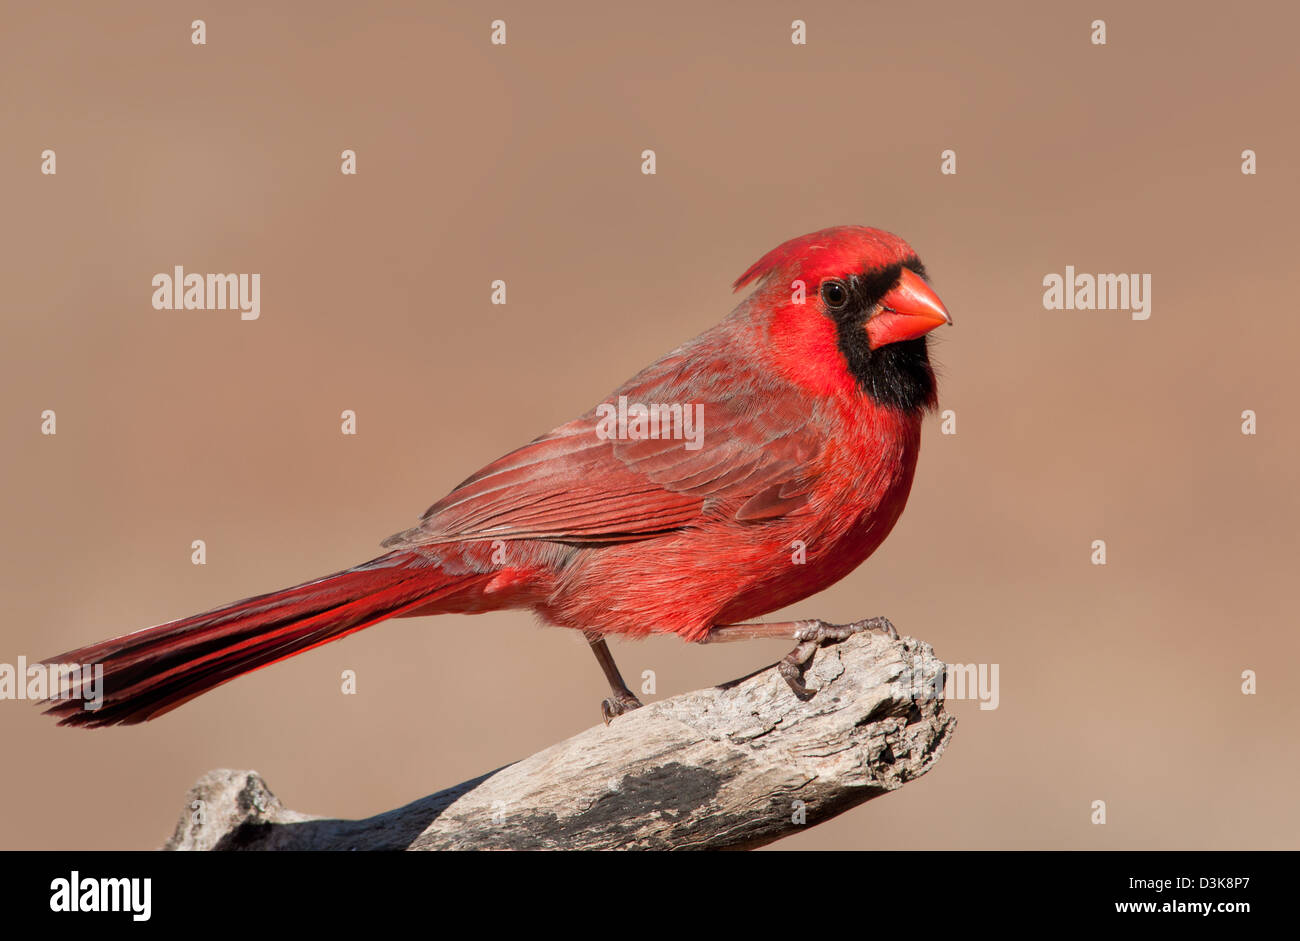 Handsome bright red Northern Cardinal male perched on a limb, against muted winter background Stock Photo